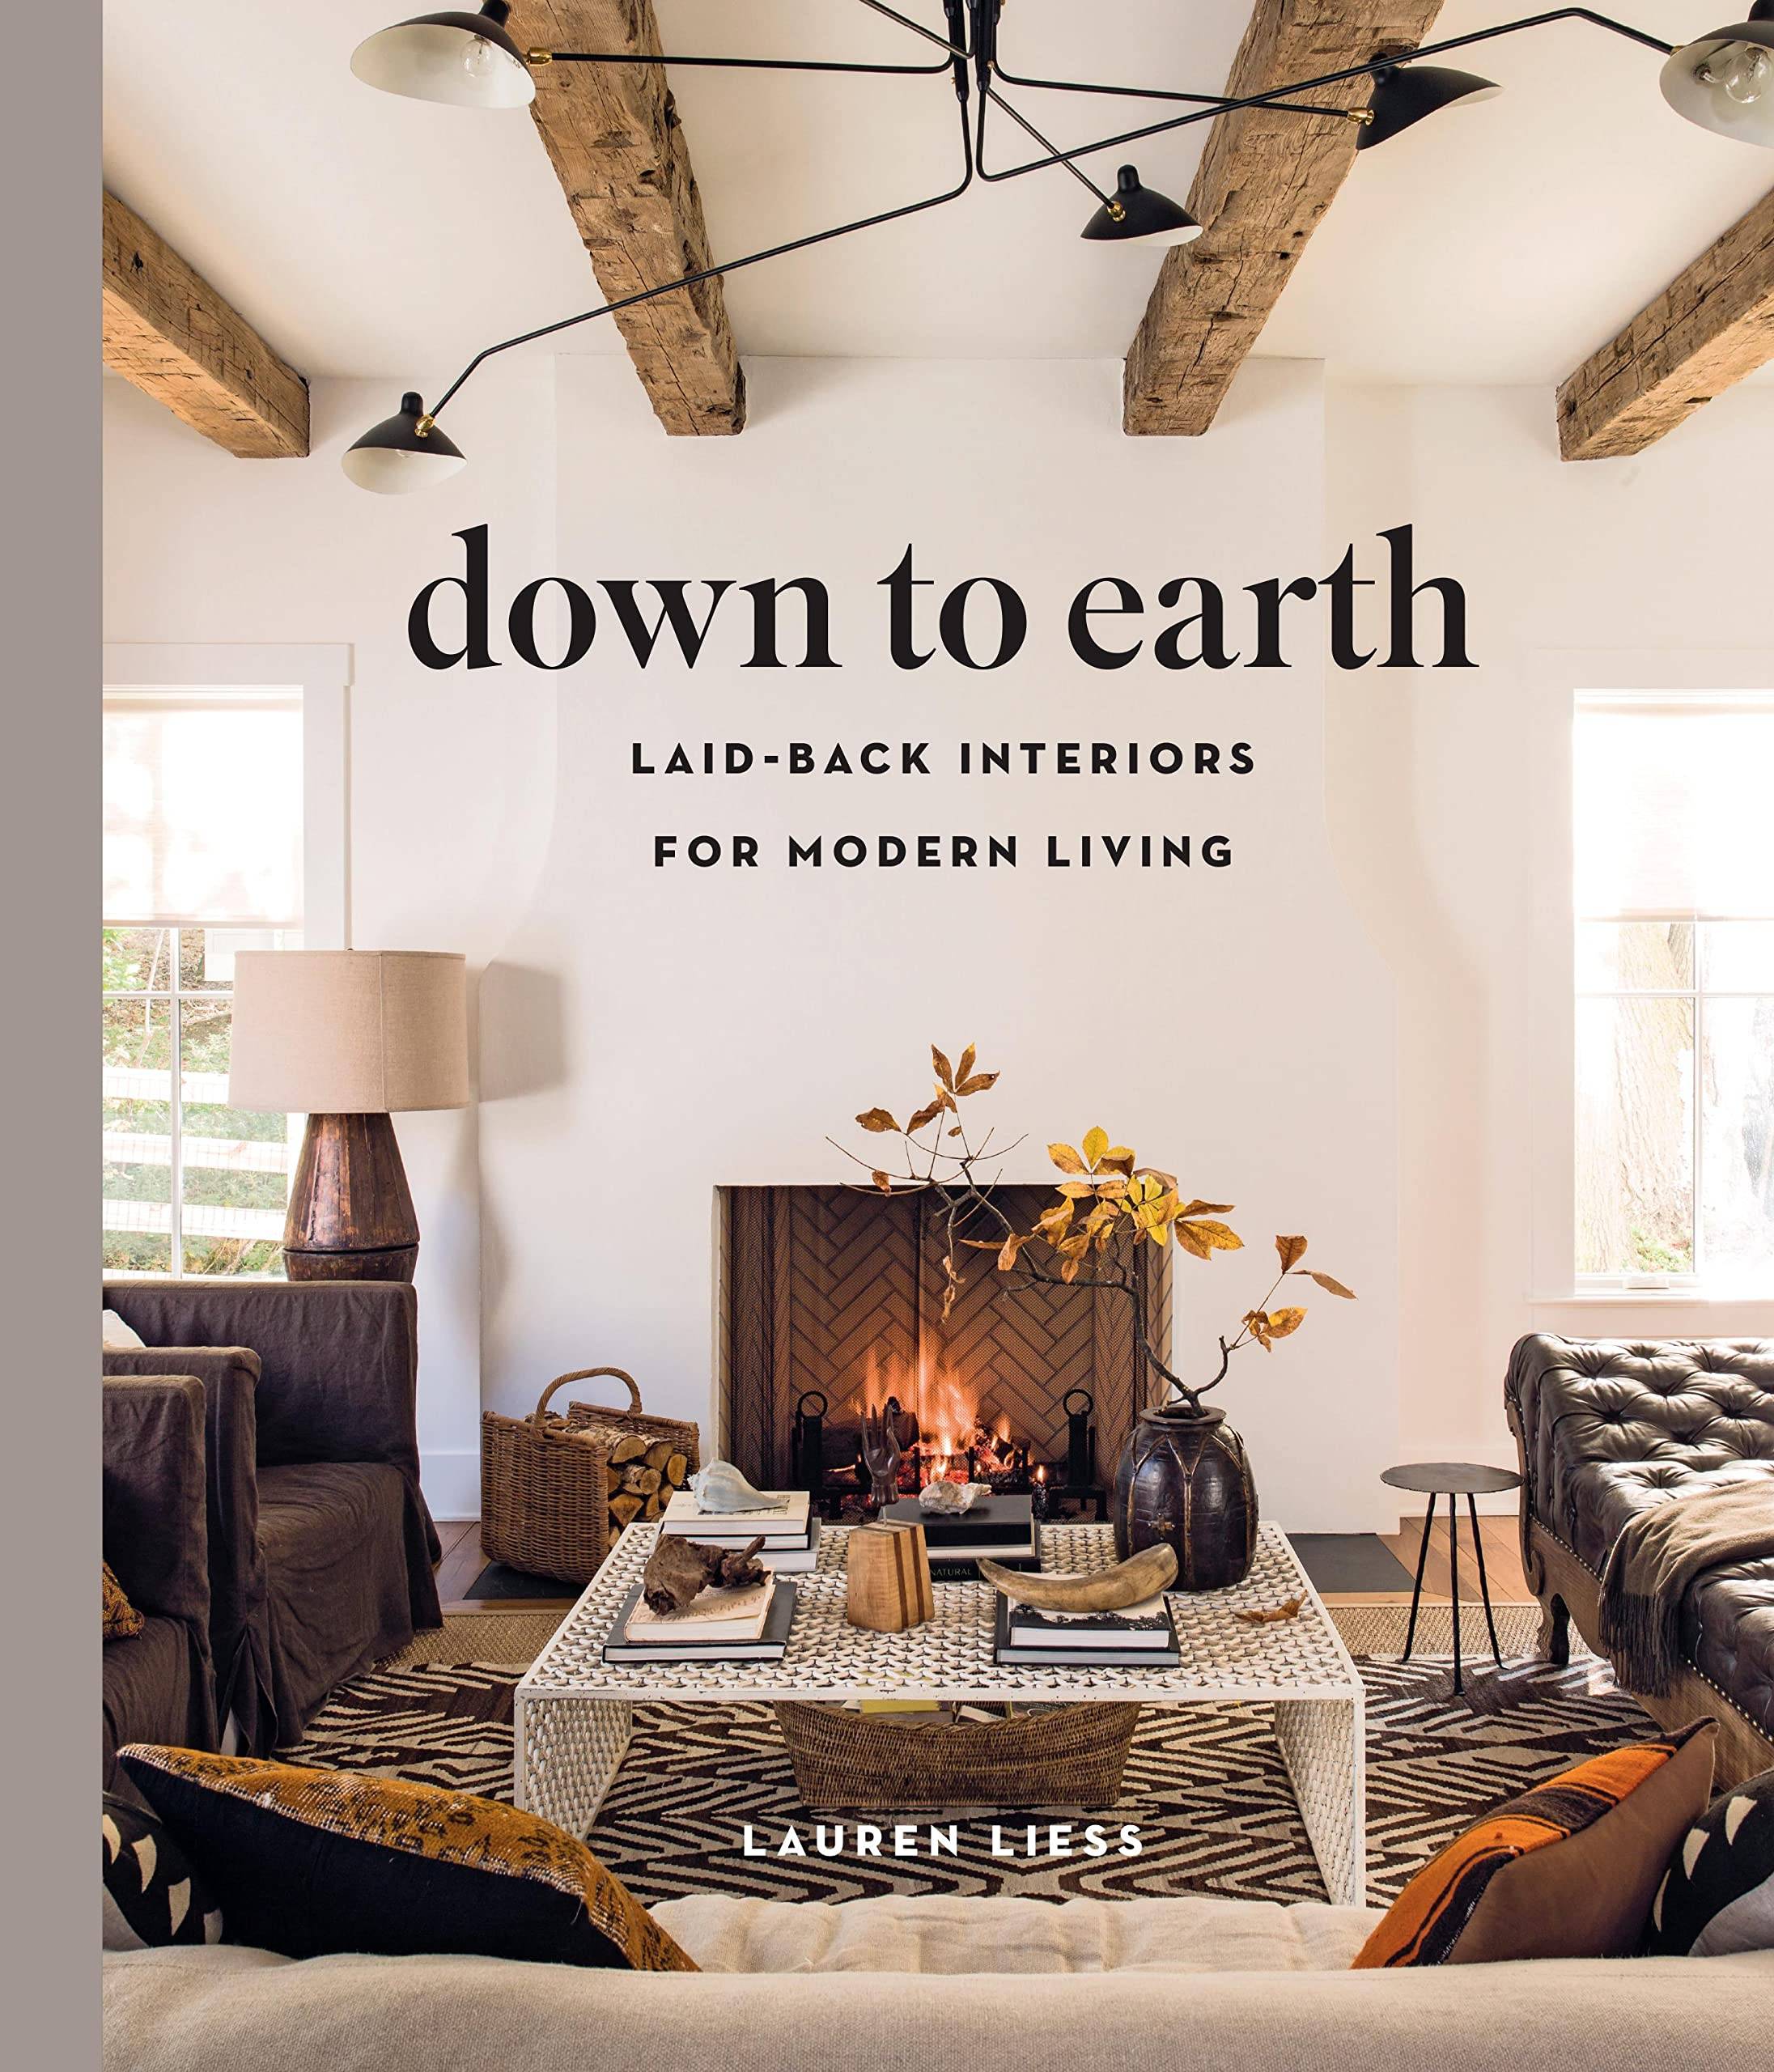 Down to Earth- Laid-back Interiors for Modern Living [By Lauren Liess]